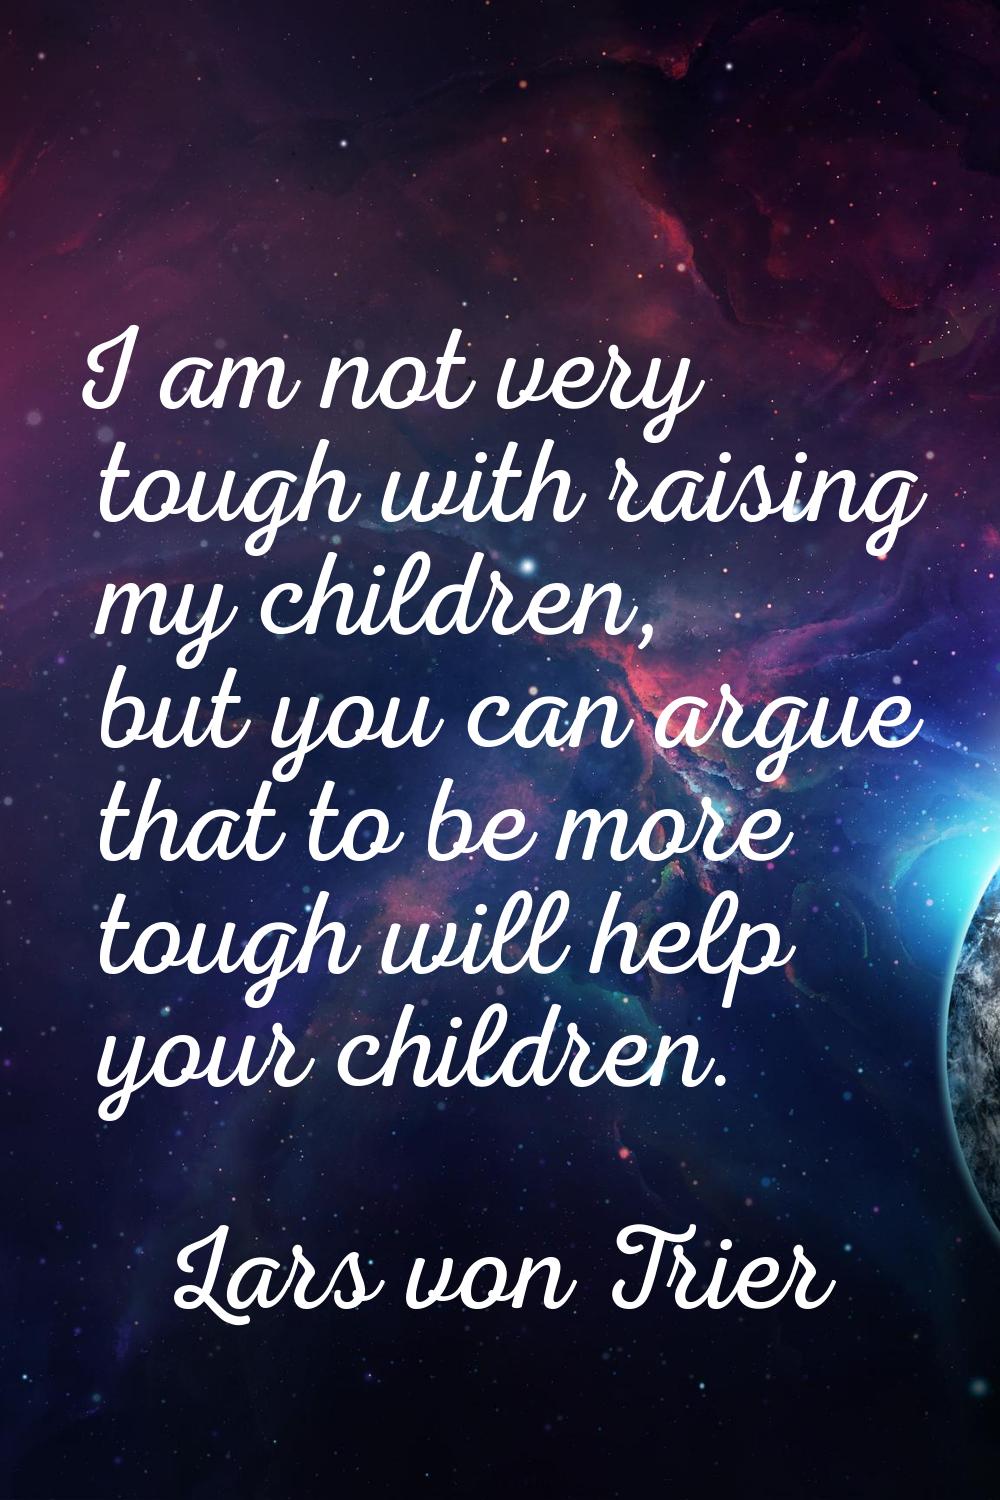 I am not very tough with raising my children, but you can argue that to be more tough will help you